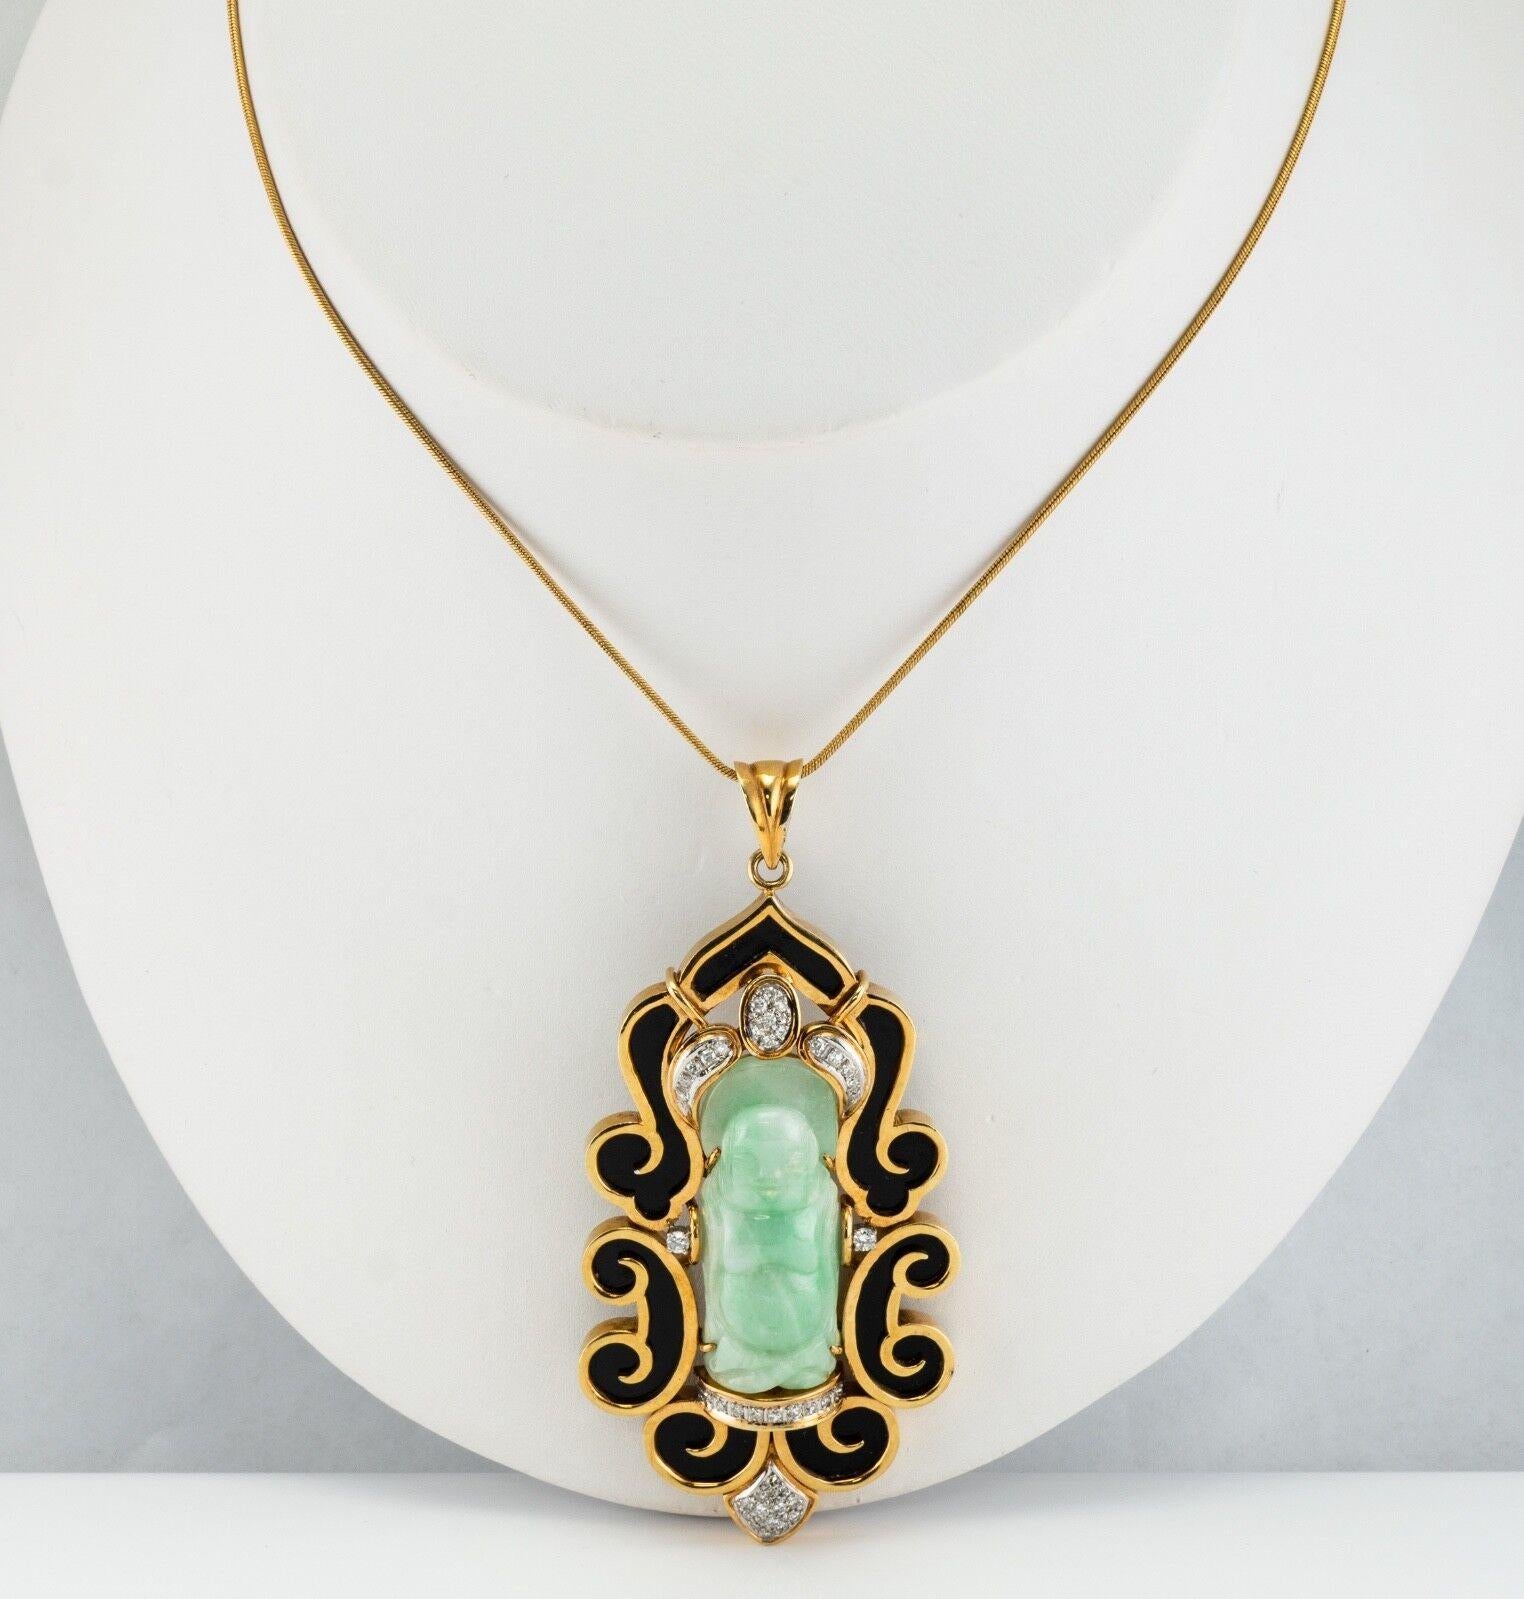 Jade Diamond Buddha Pendant 14K Gold Vintage

This one of a kind estate pendant is finely crafted in solid 14K Gold and set with a genuine carved Jade, diamonds, and black onyx. The carved Buddha measures 1-5/16